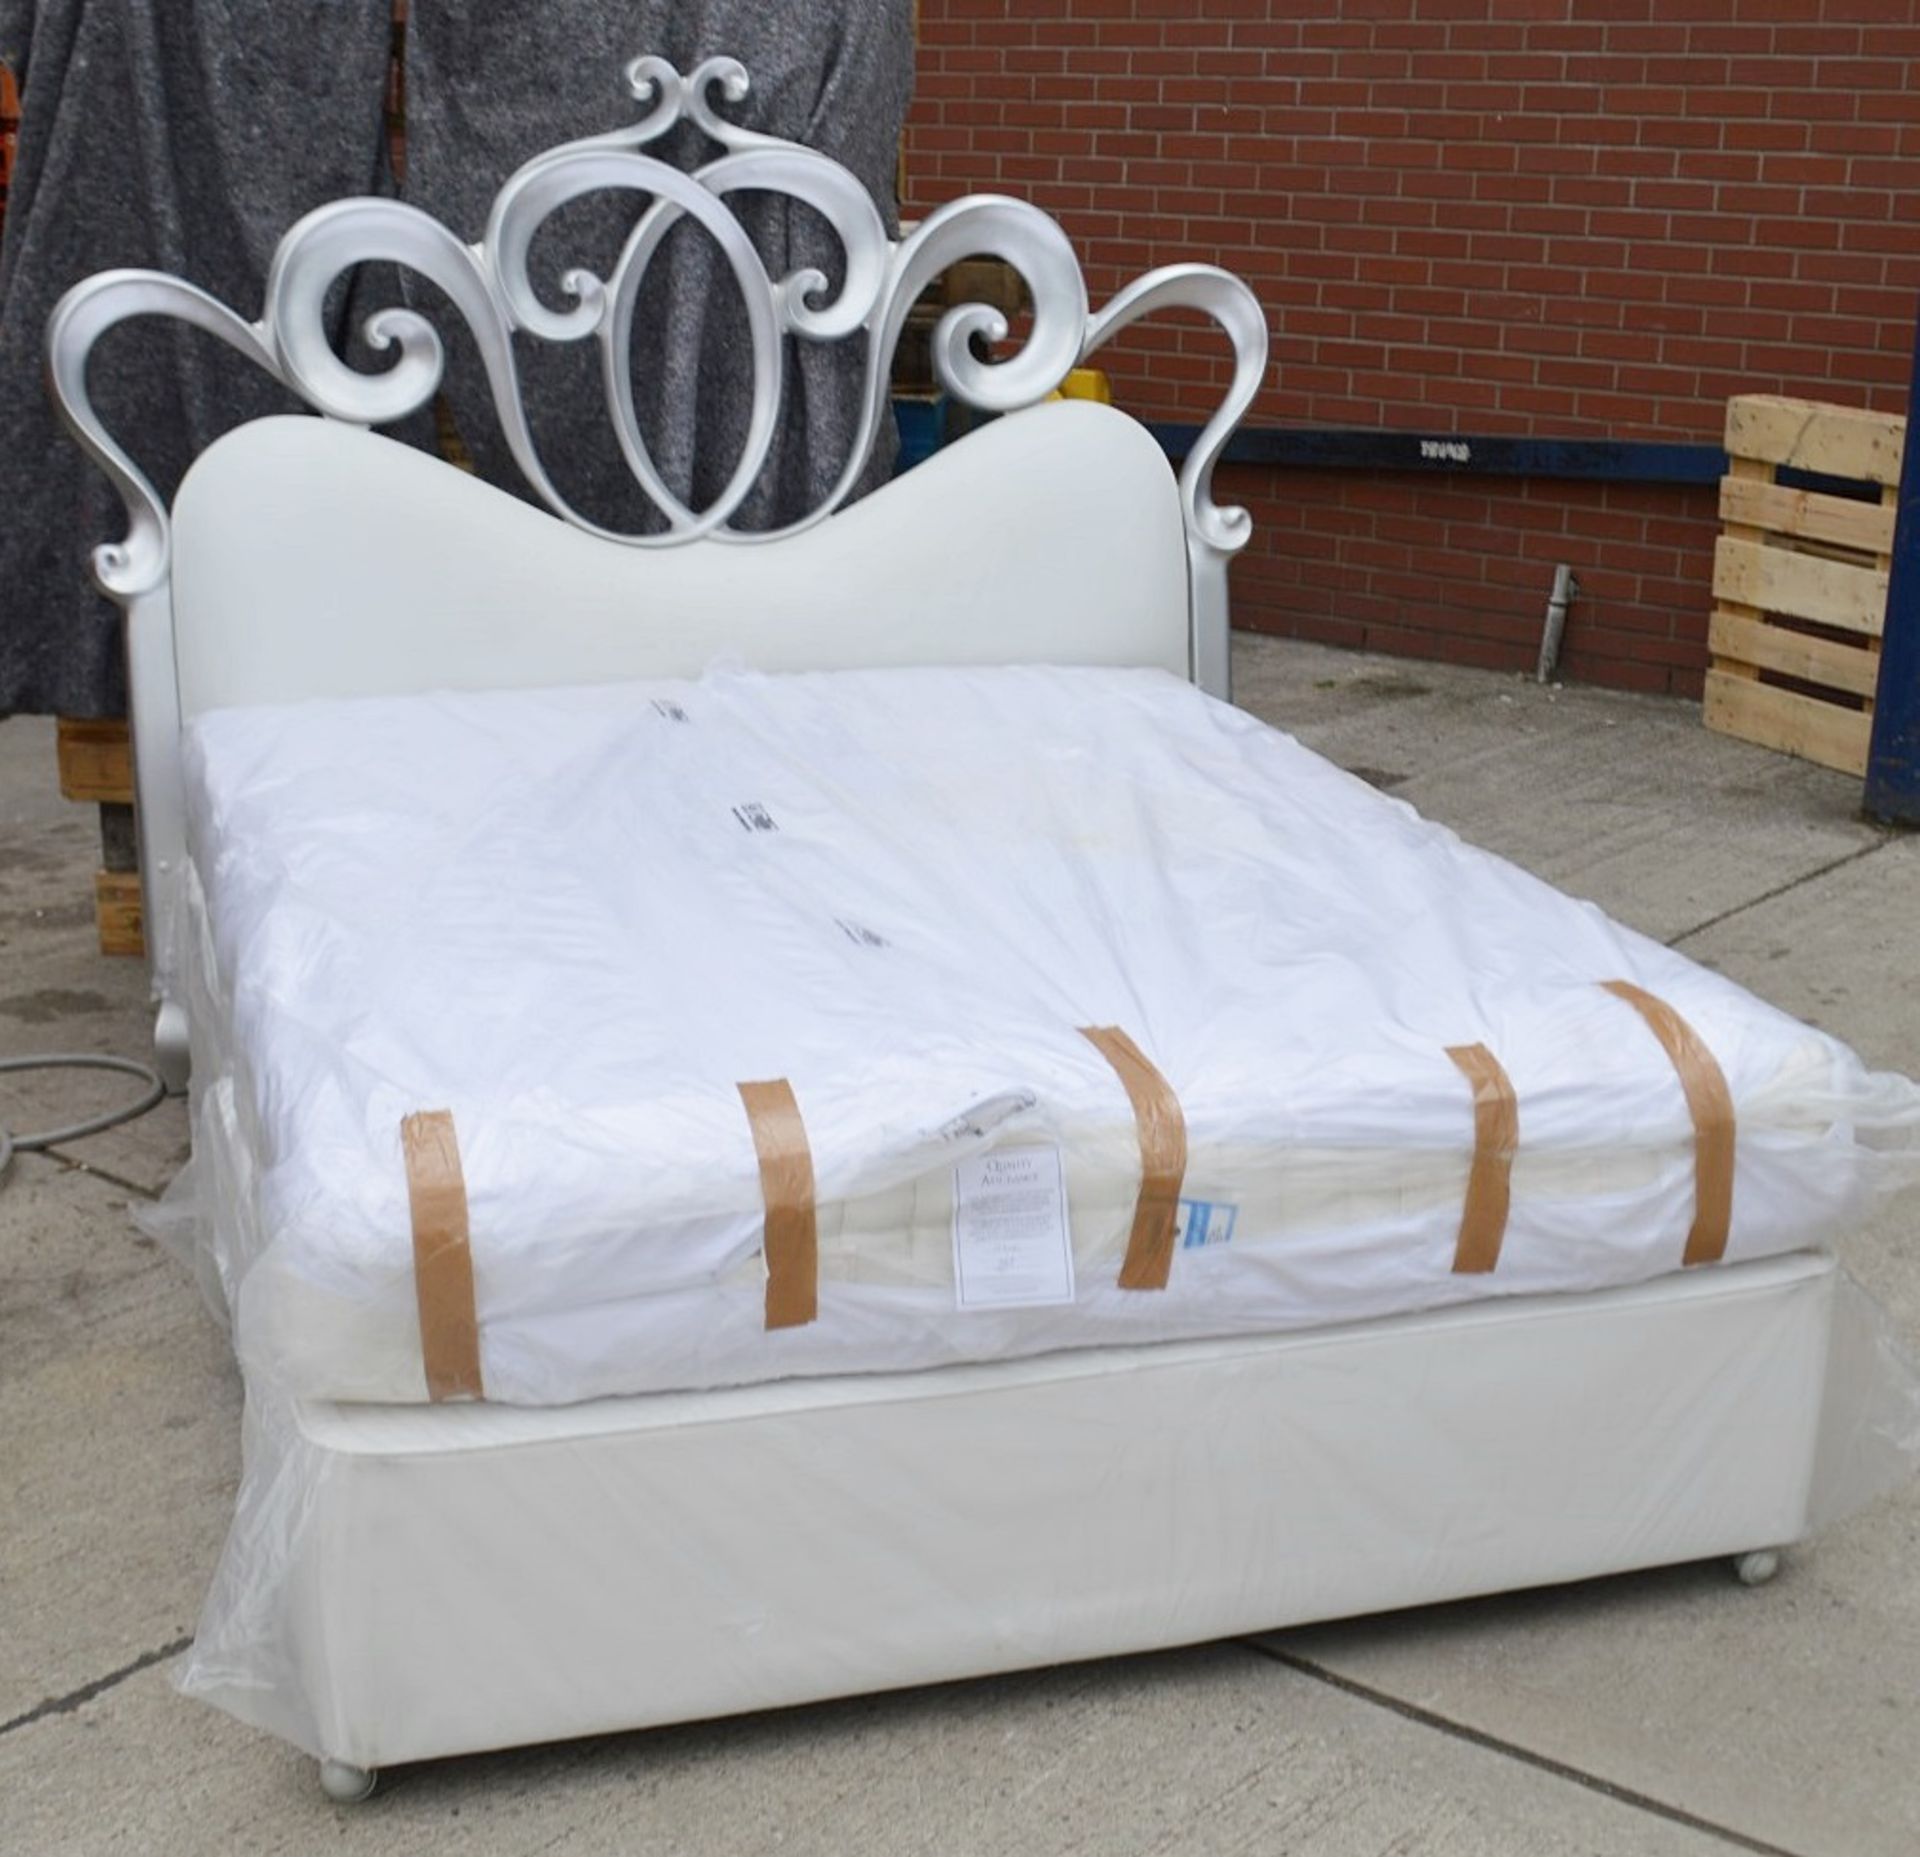 1 x Kingsize Divan Bed With An Ornate CorteZari Italian Headboard In Silver Upholstered In White - Image 4 of 4